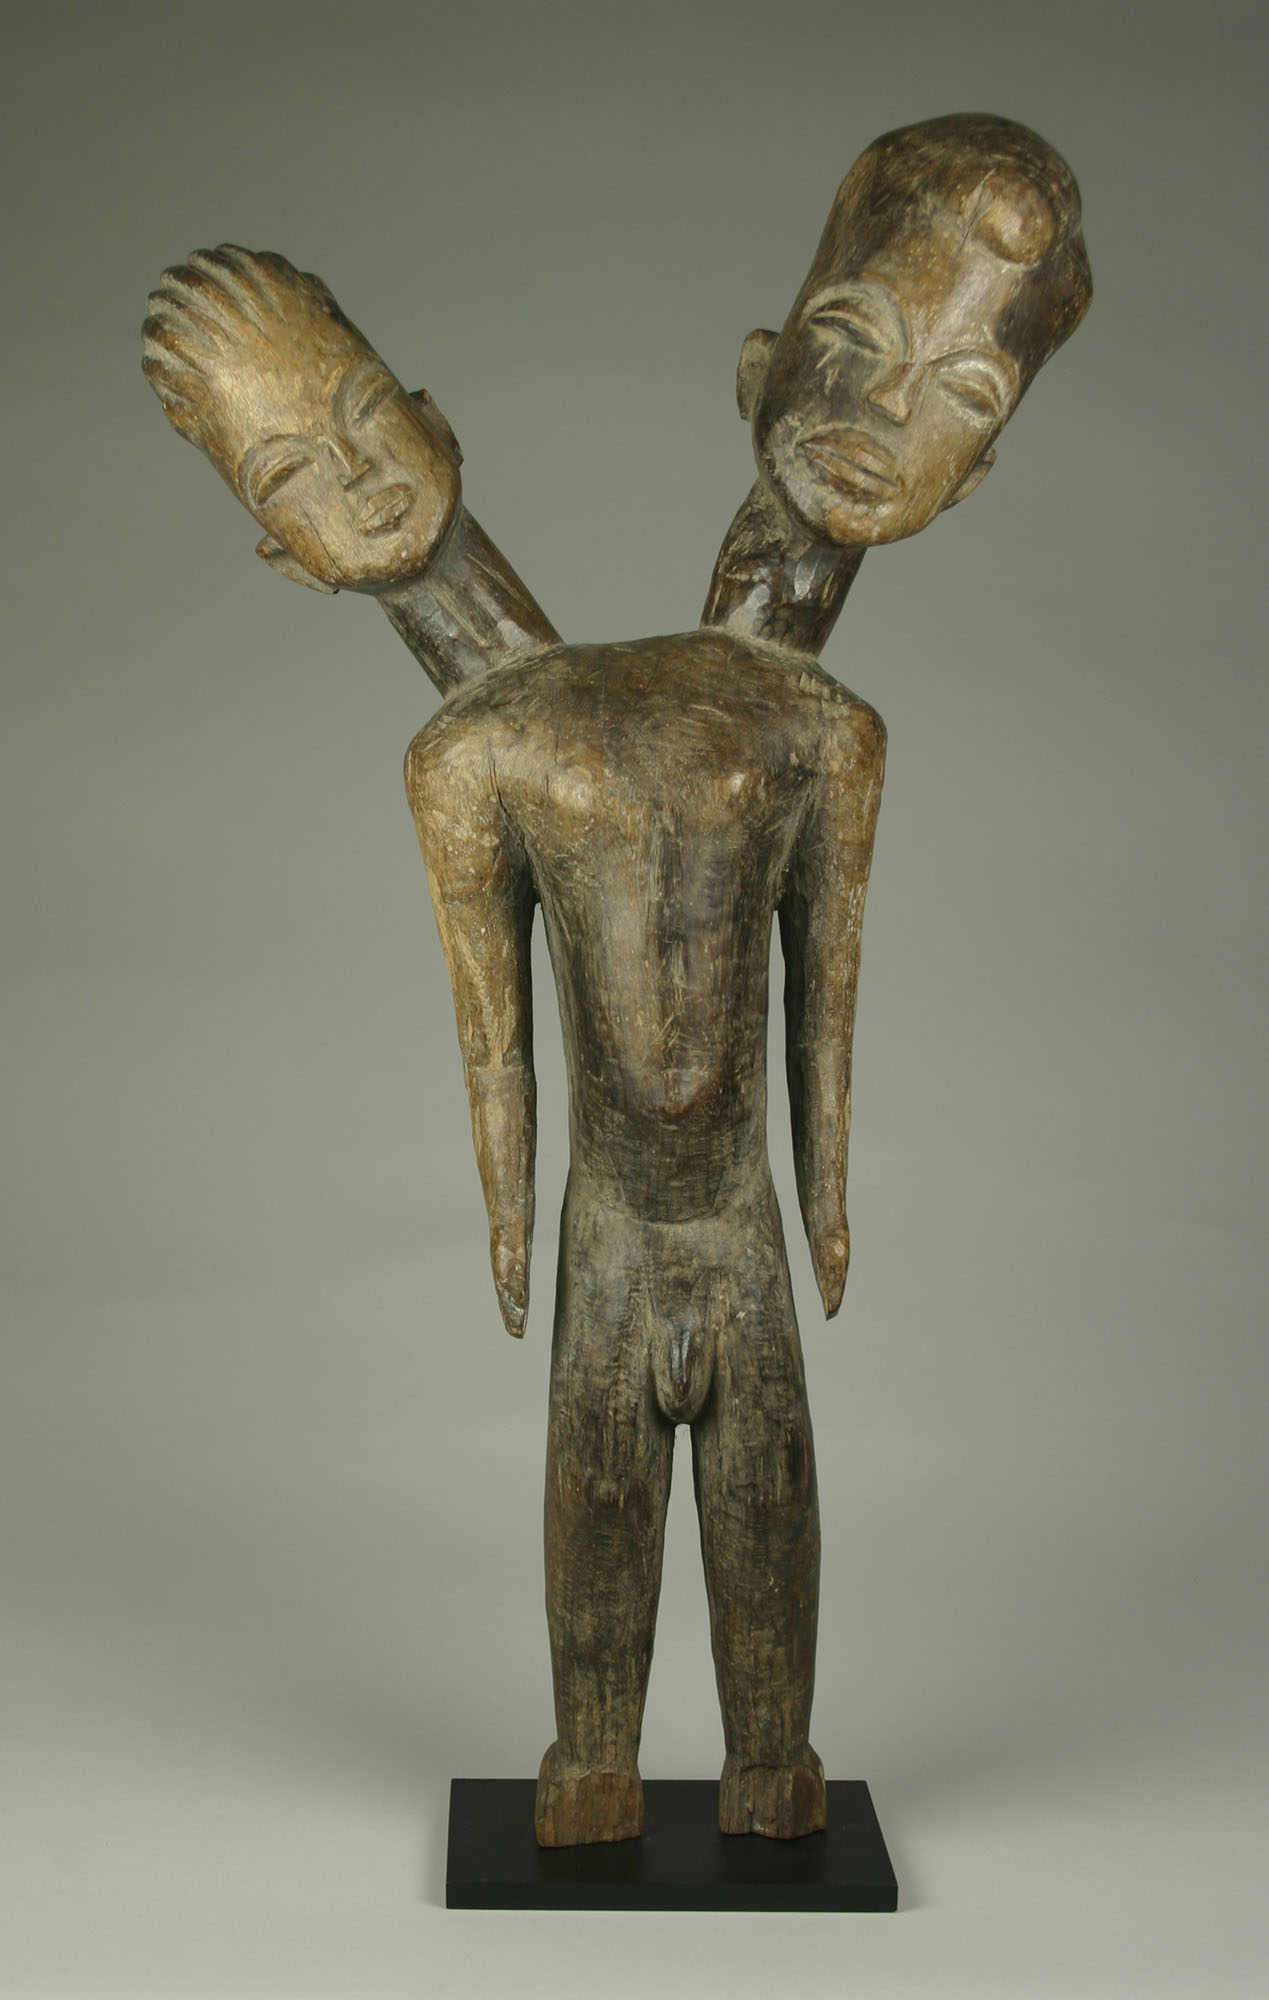 Unidentified artist (Africa, Burkina Faso or Ivory Coast; Lobi), Untitled, n.d. Wood. Collection of DePaul Art Museum, gift of the May Weber Foundation, 2001.51